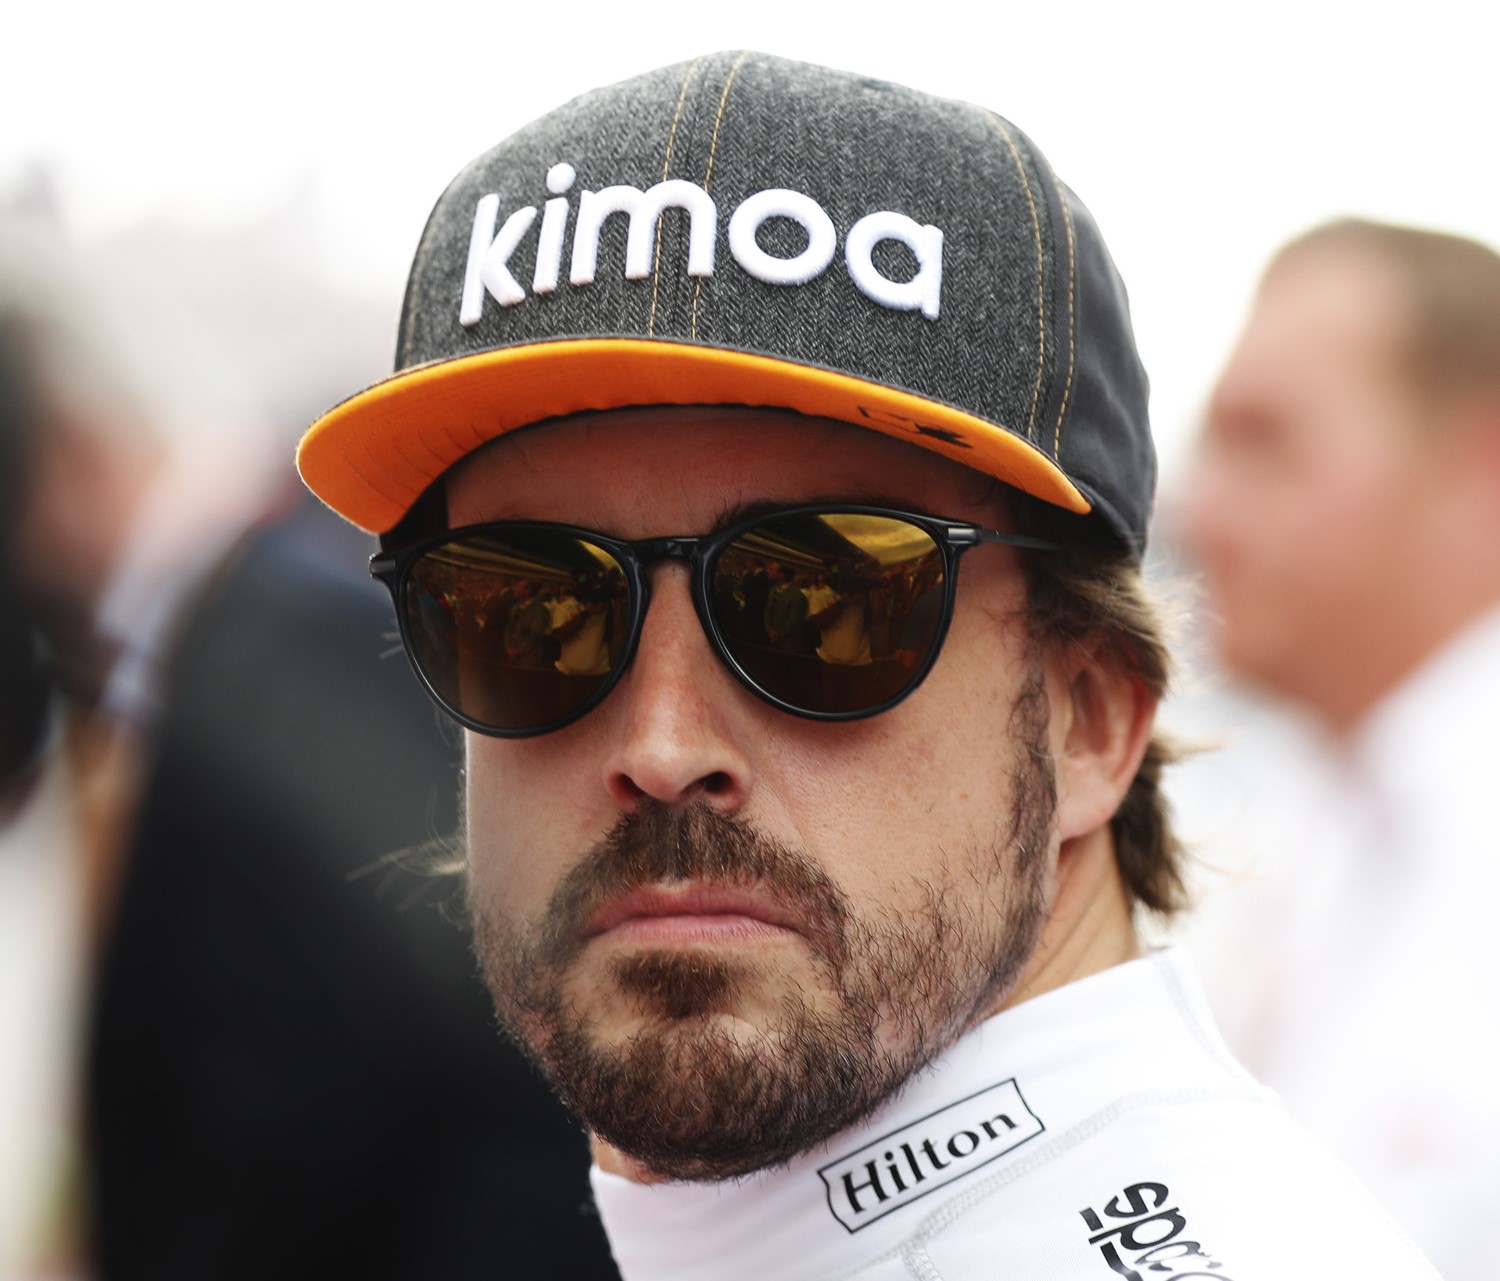 Alonso won't have to endure the Honda car blowing past his McLaren in 2019